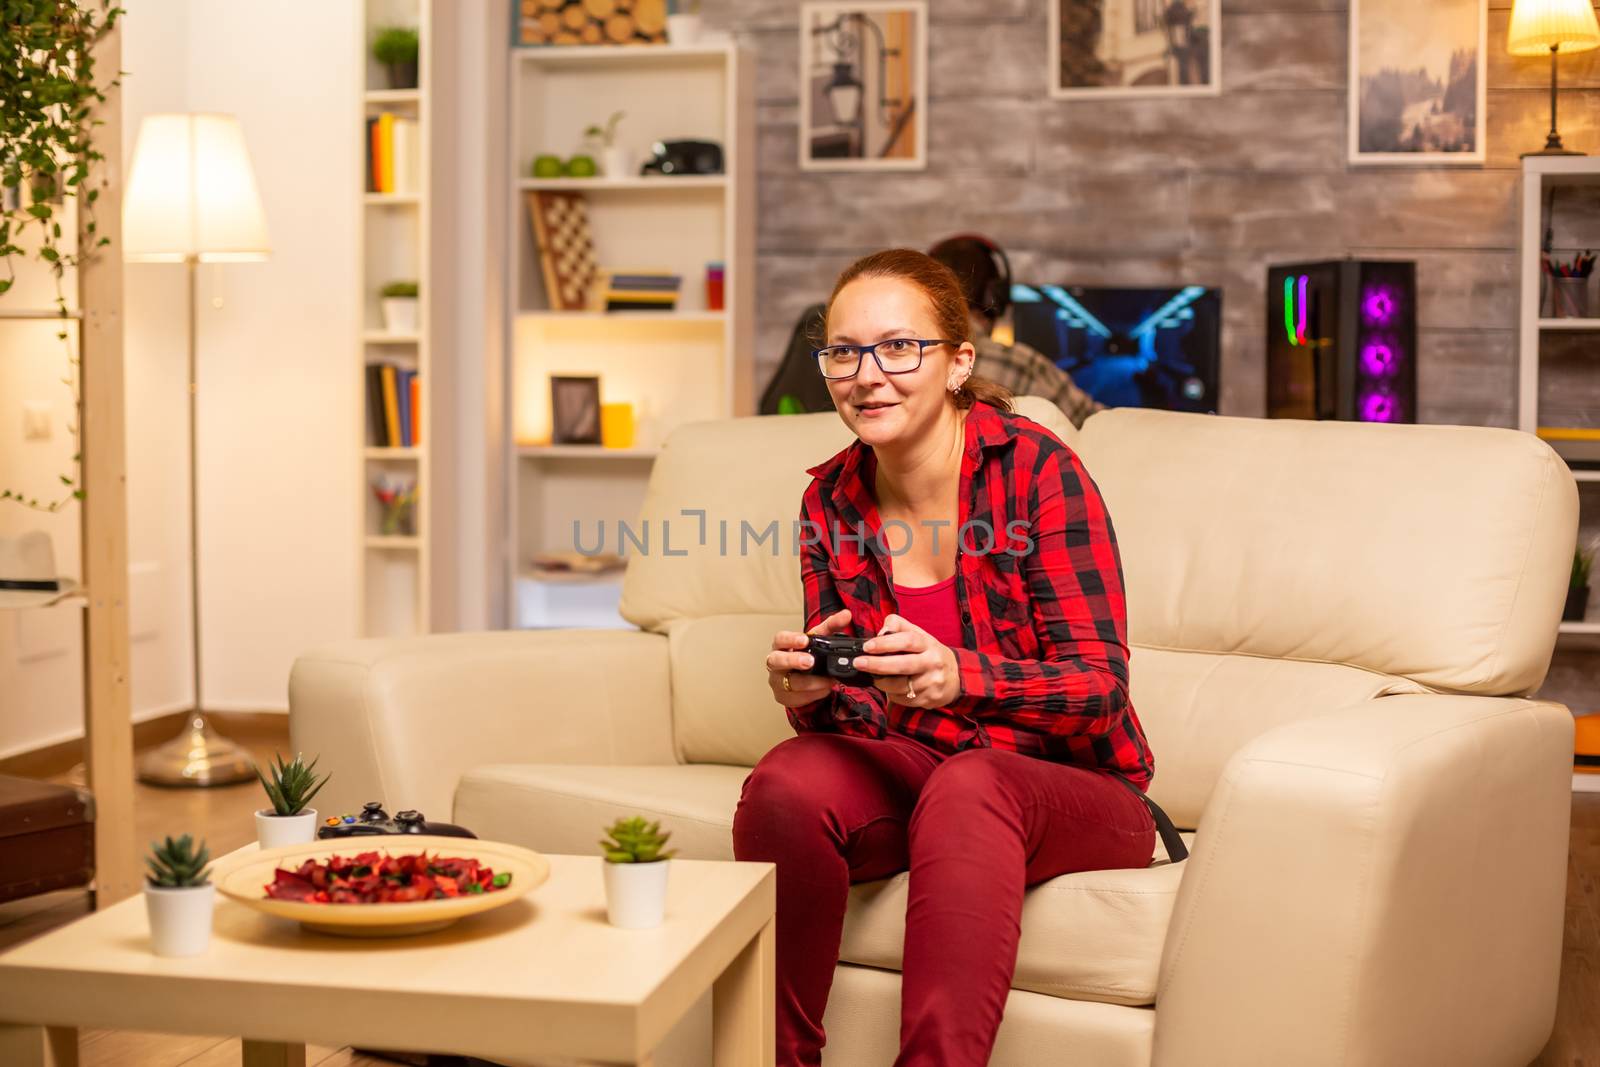 Woman gamer playing video games on the console in the living room late at night